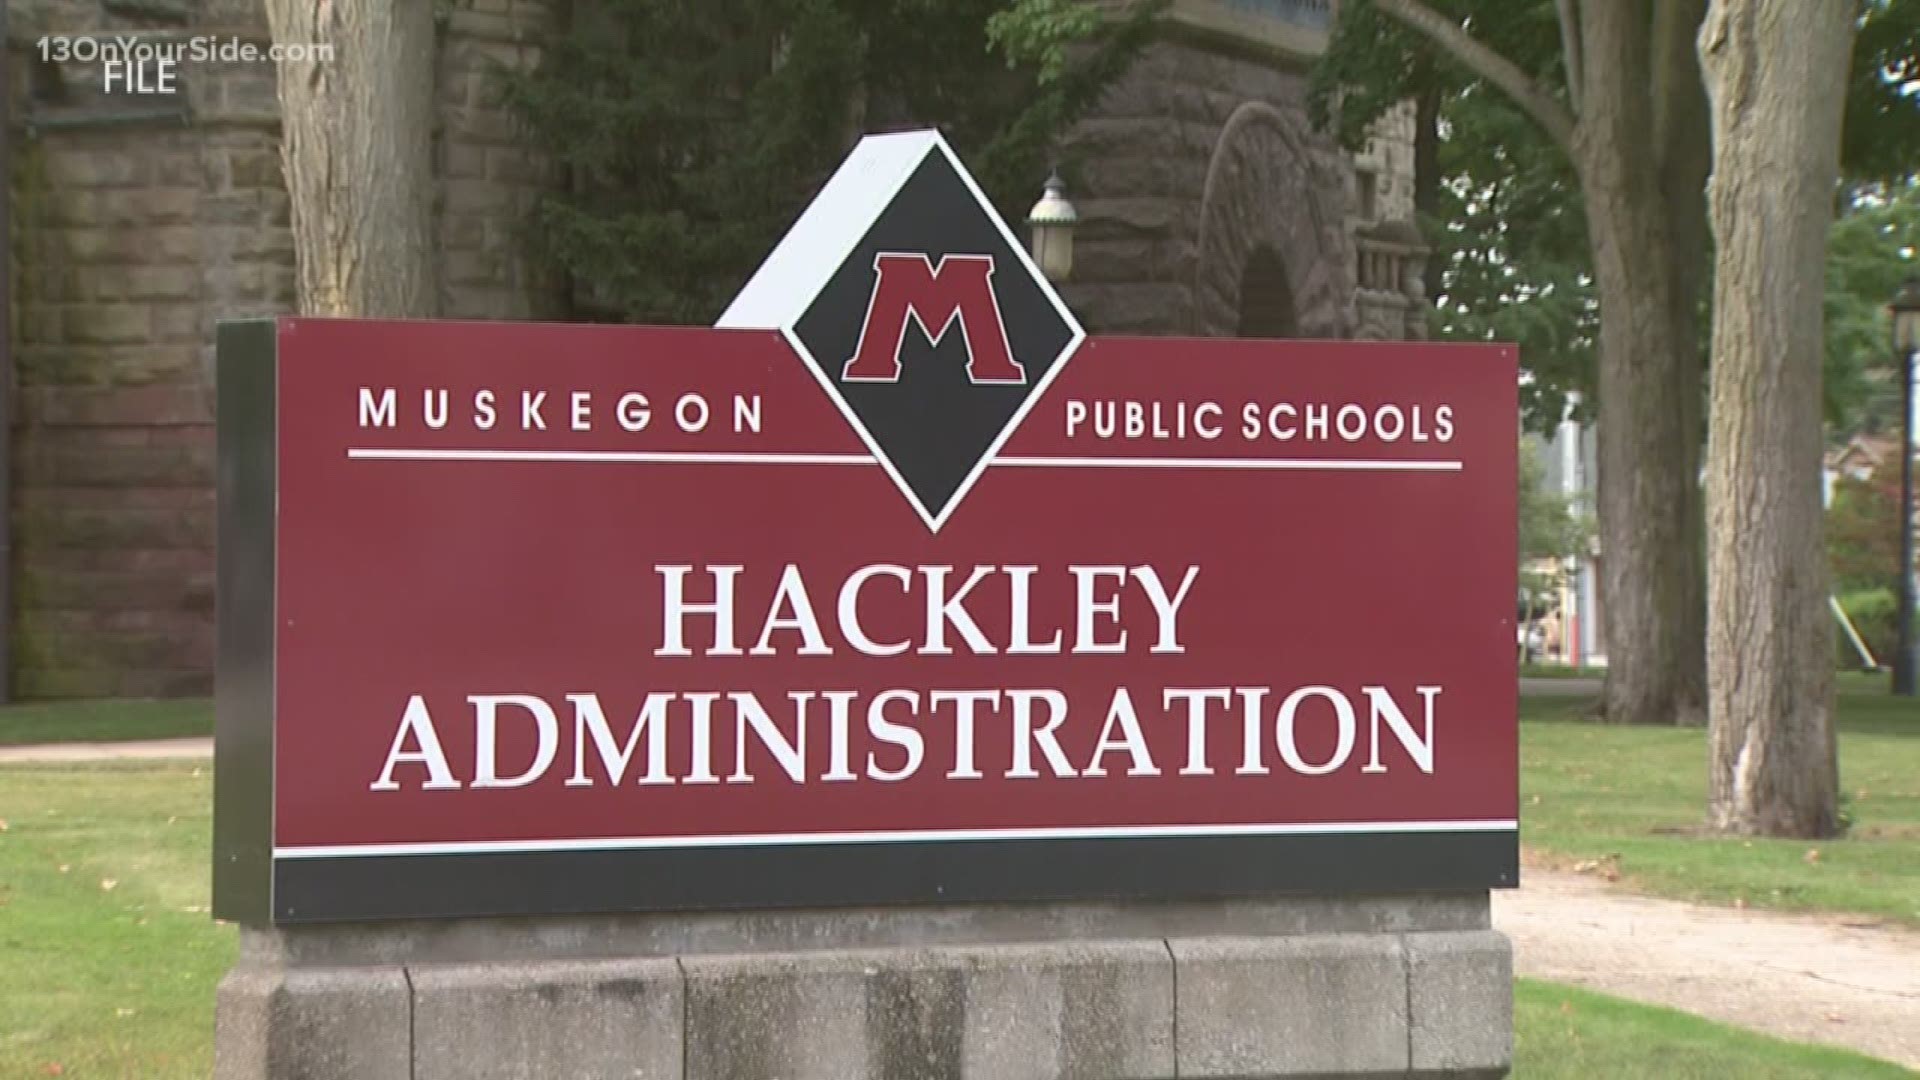 The Muskegon School District will being interviewing six candidates for the superintendent position. The candidate interviews are open to the public and will be held at Hackley Administration Building.